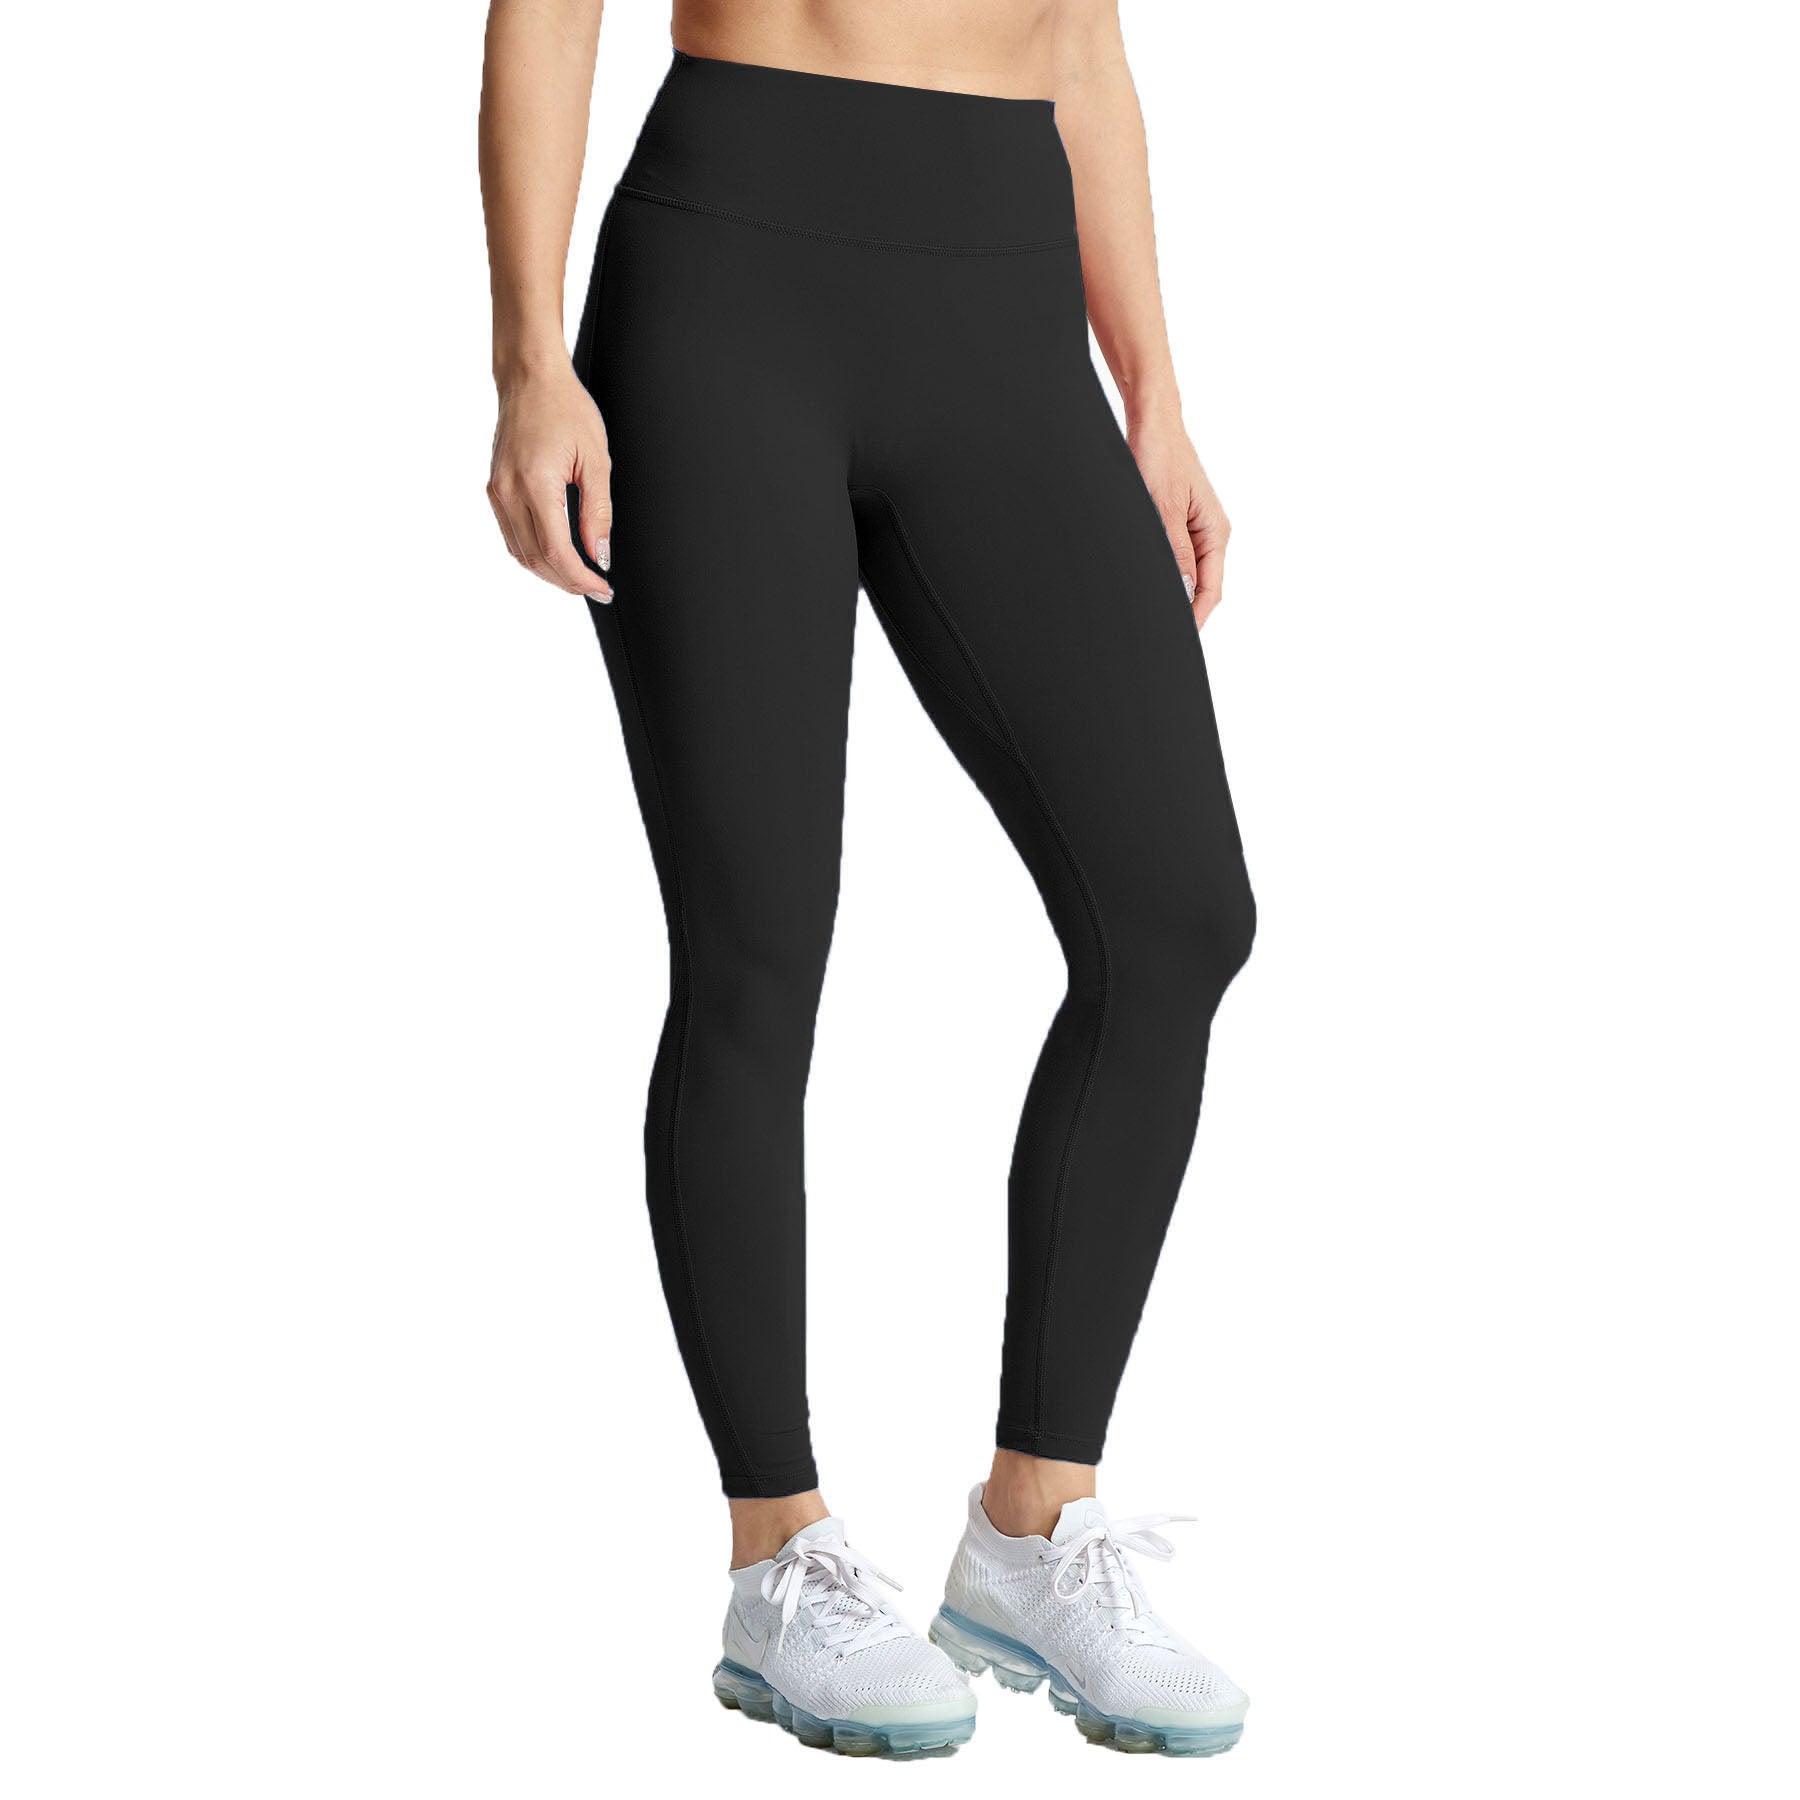 Aoxjox Trinity High Waisted Yoga Pants with Pockets for Women Tummy Control  Cross-Waist Crossover Workout Leggings, B Iron Grey (Regular Waistband),  Large : Buy Online at Best Price in KSA - Souq